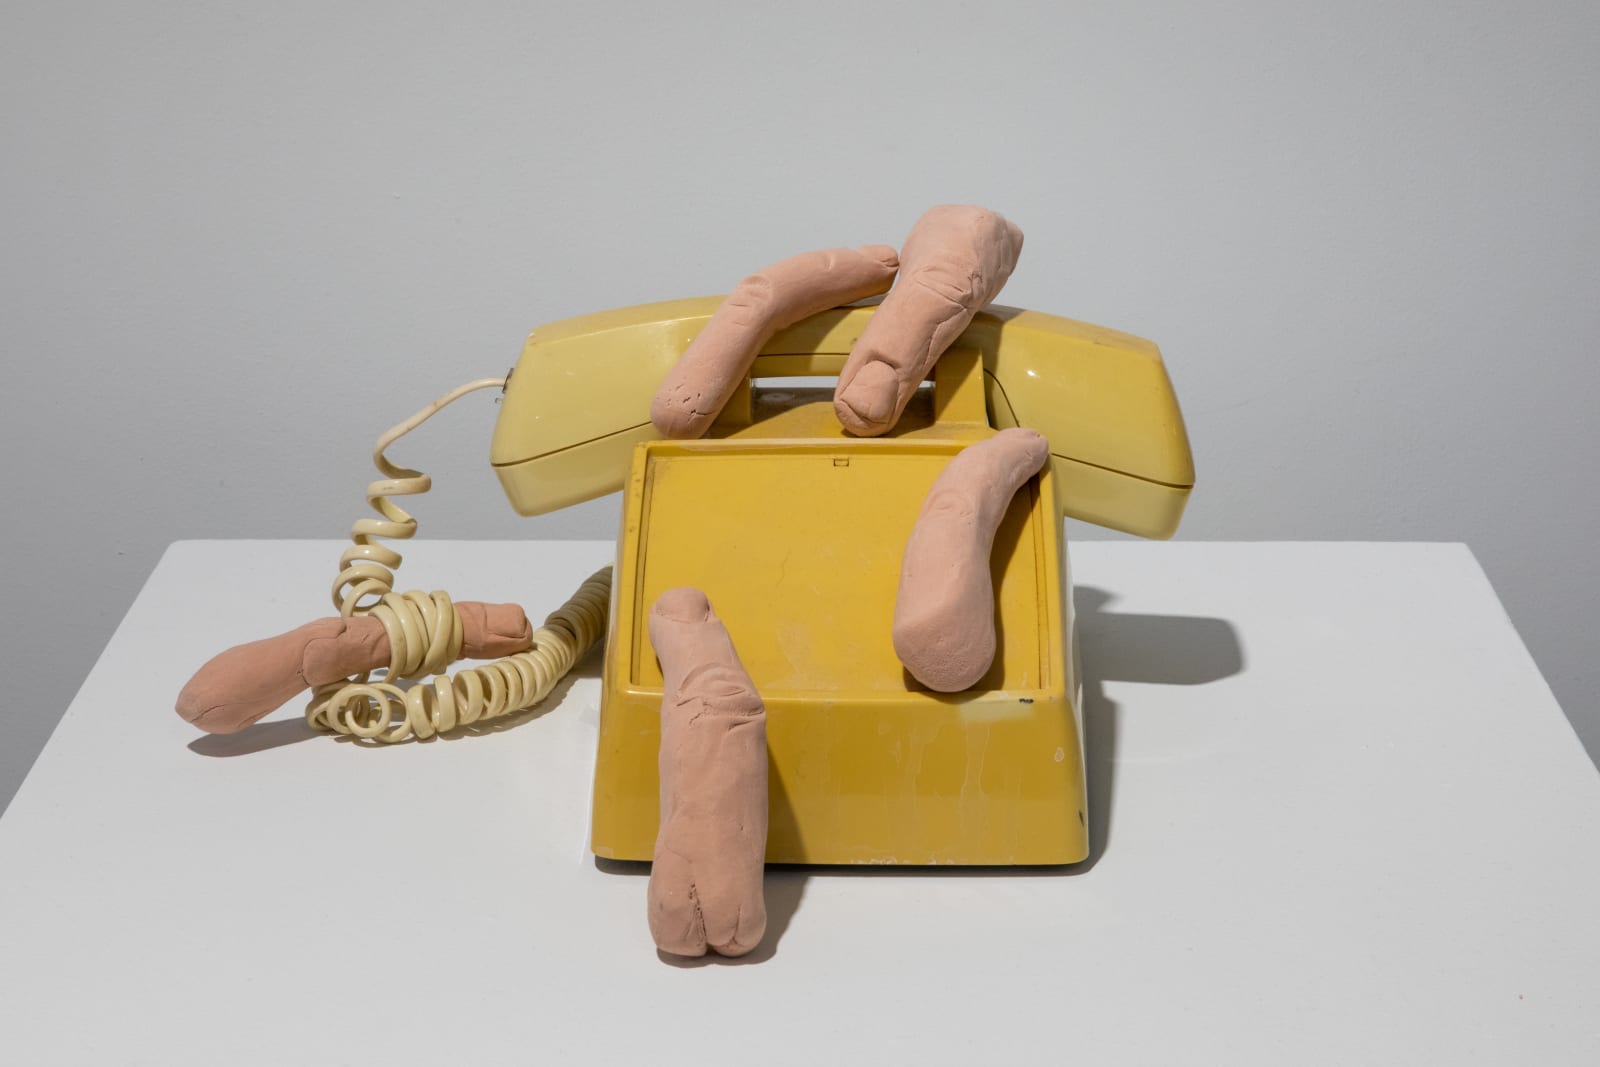 Molly Lowe, FINGER PHONE, 2013